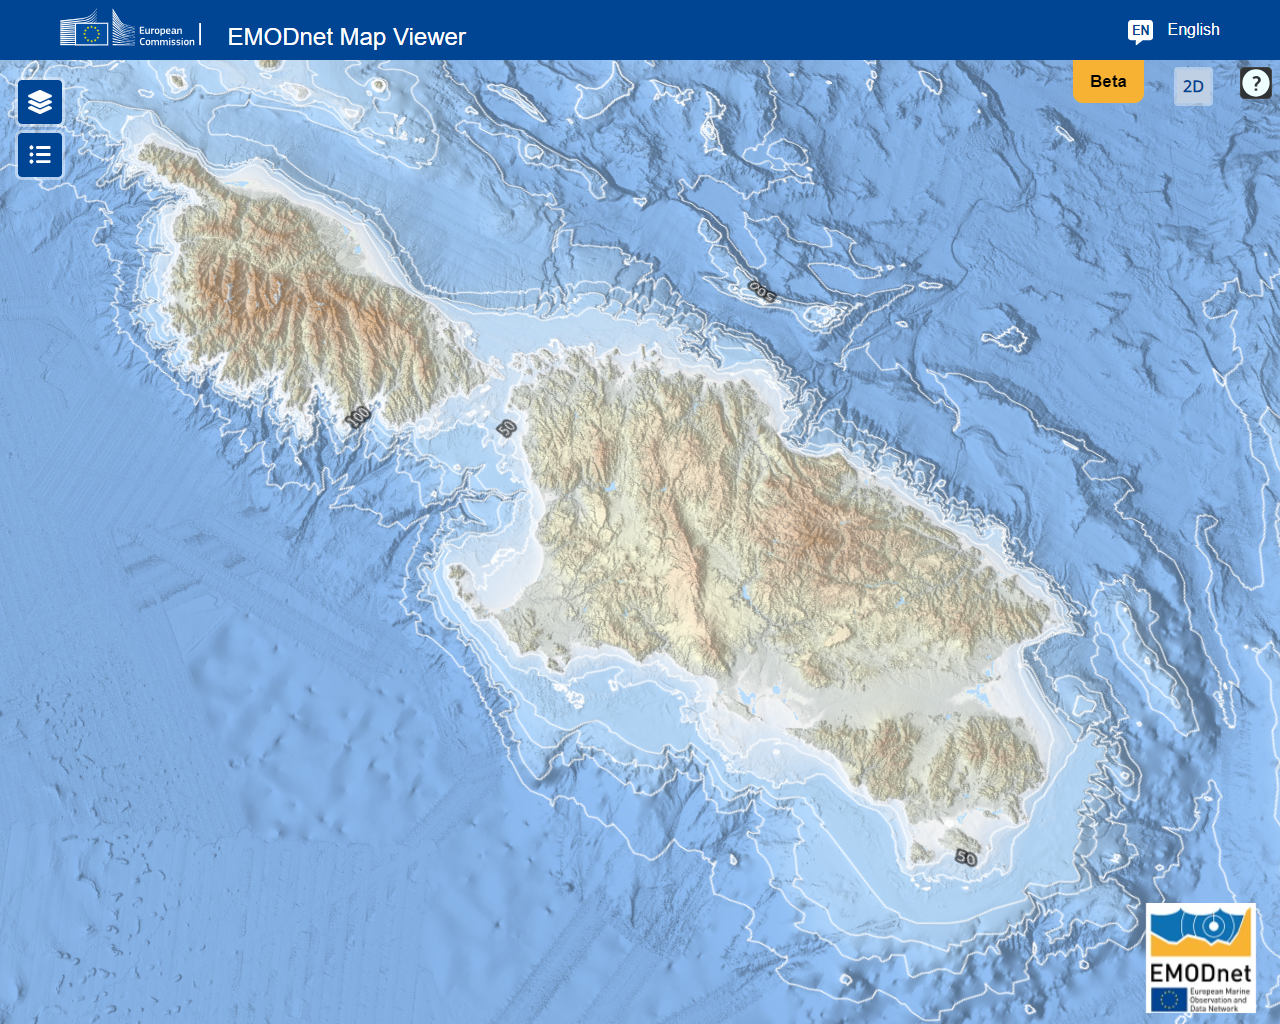 3D bathymetry of the Mesolithic Atlantic Ocean now known as the Mediterranean Sea 2